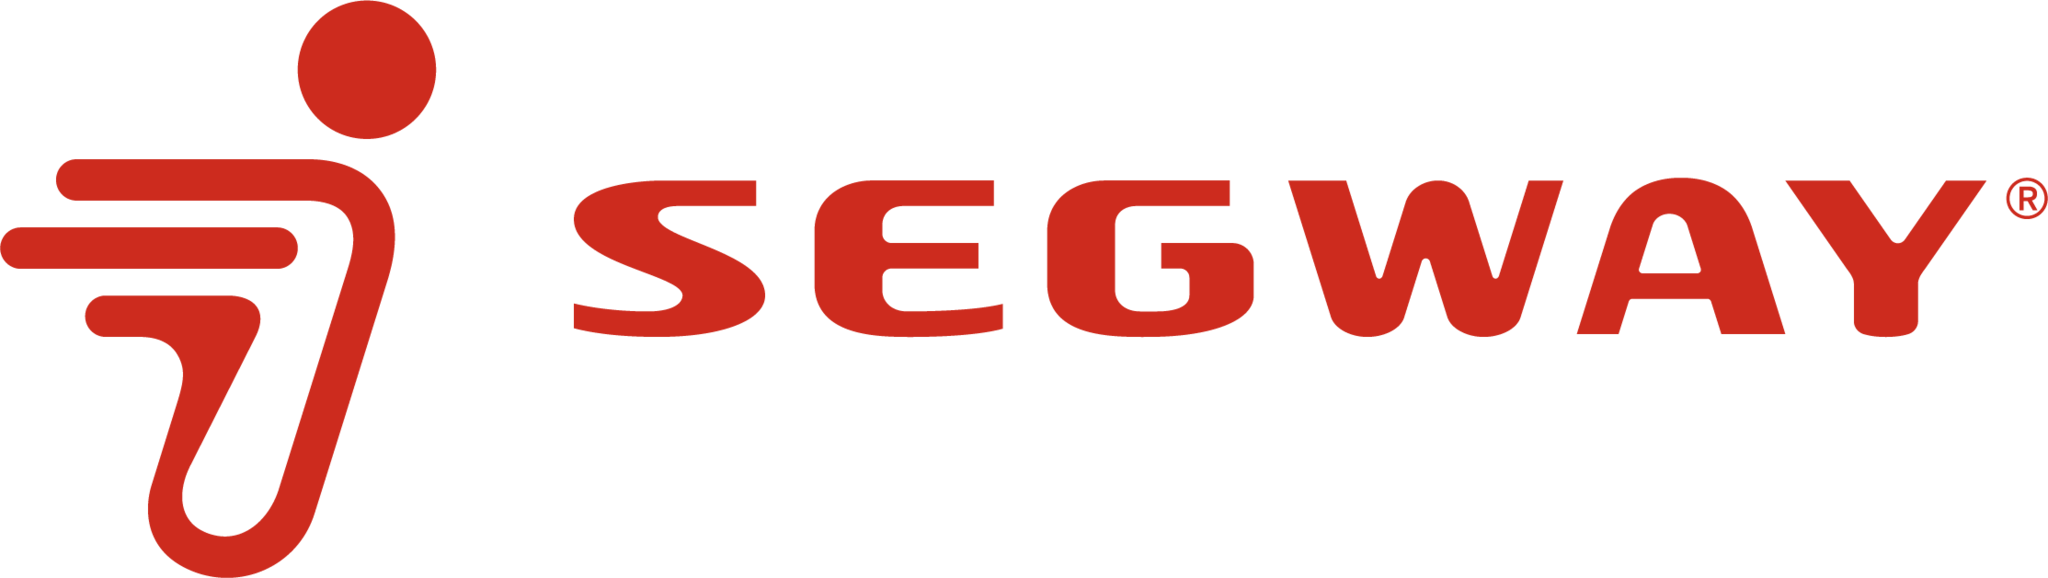 Segway Promotions